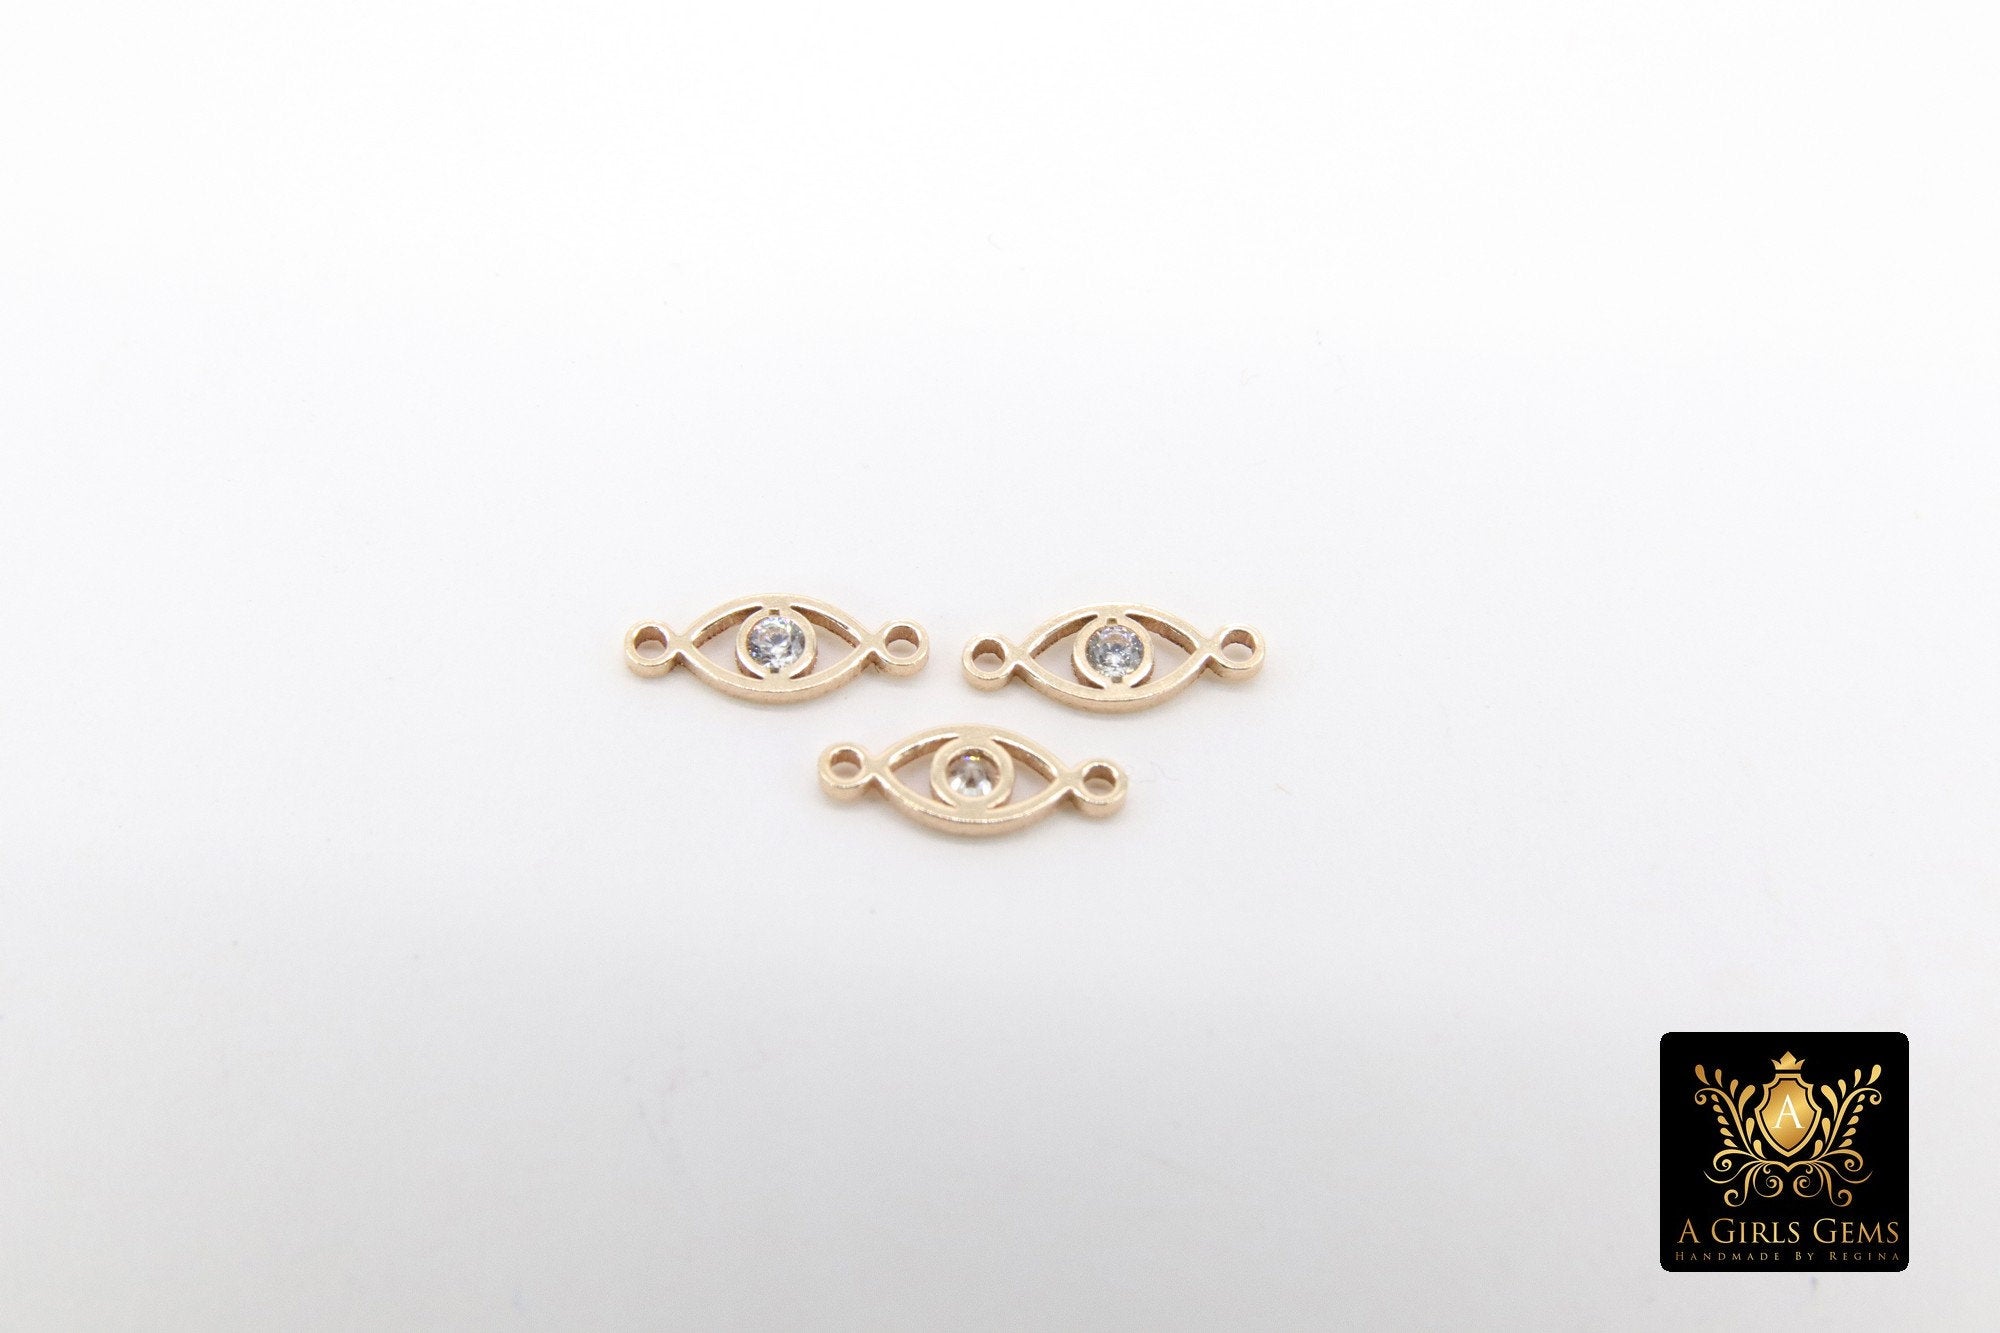 14 K Gold Filled Evil Eye Connector, CZ Micro Pave Evil Eyes Link #3453, Tiny Minimalist Permanent Jewelry